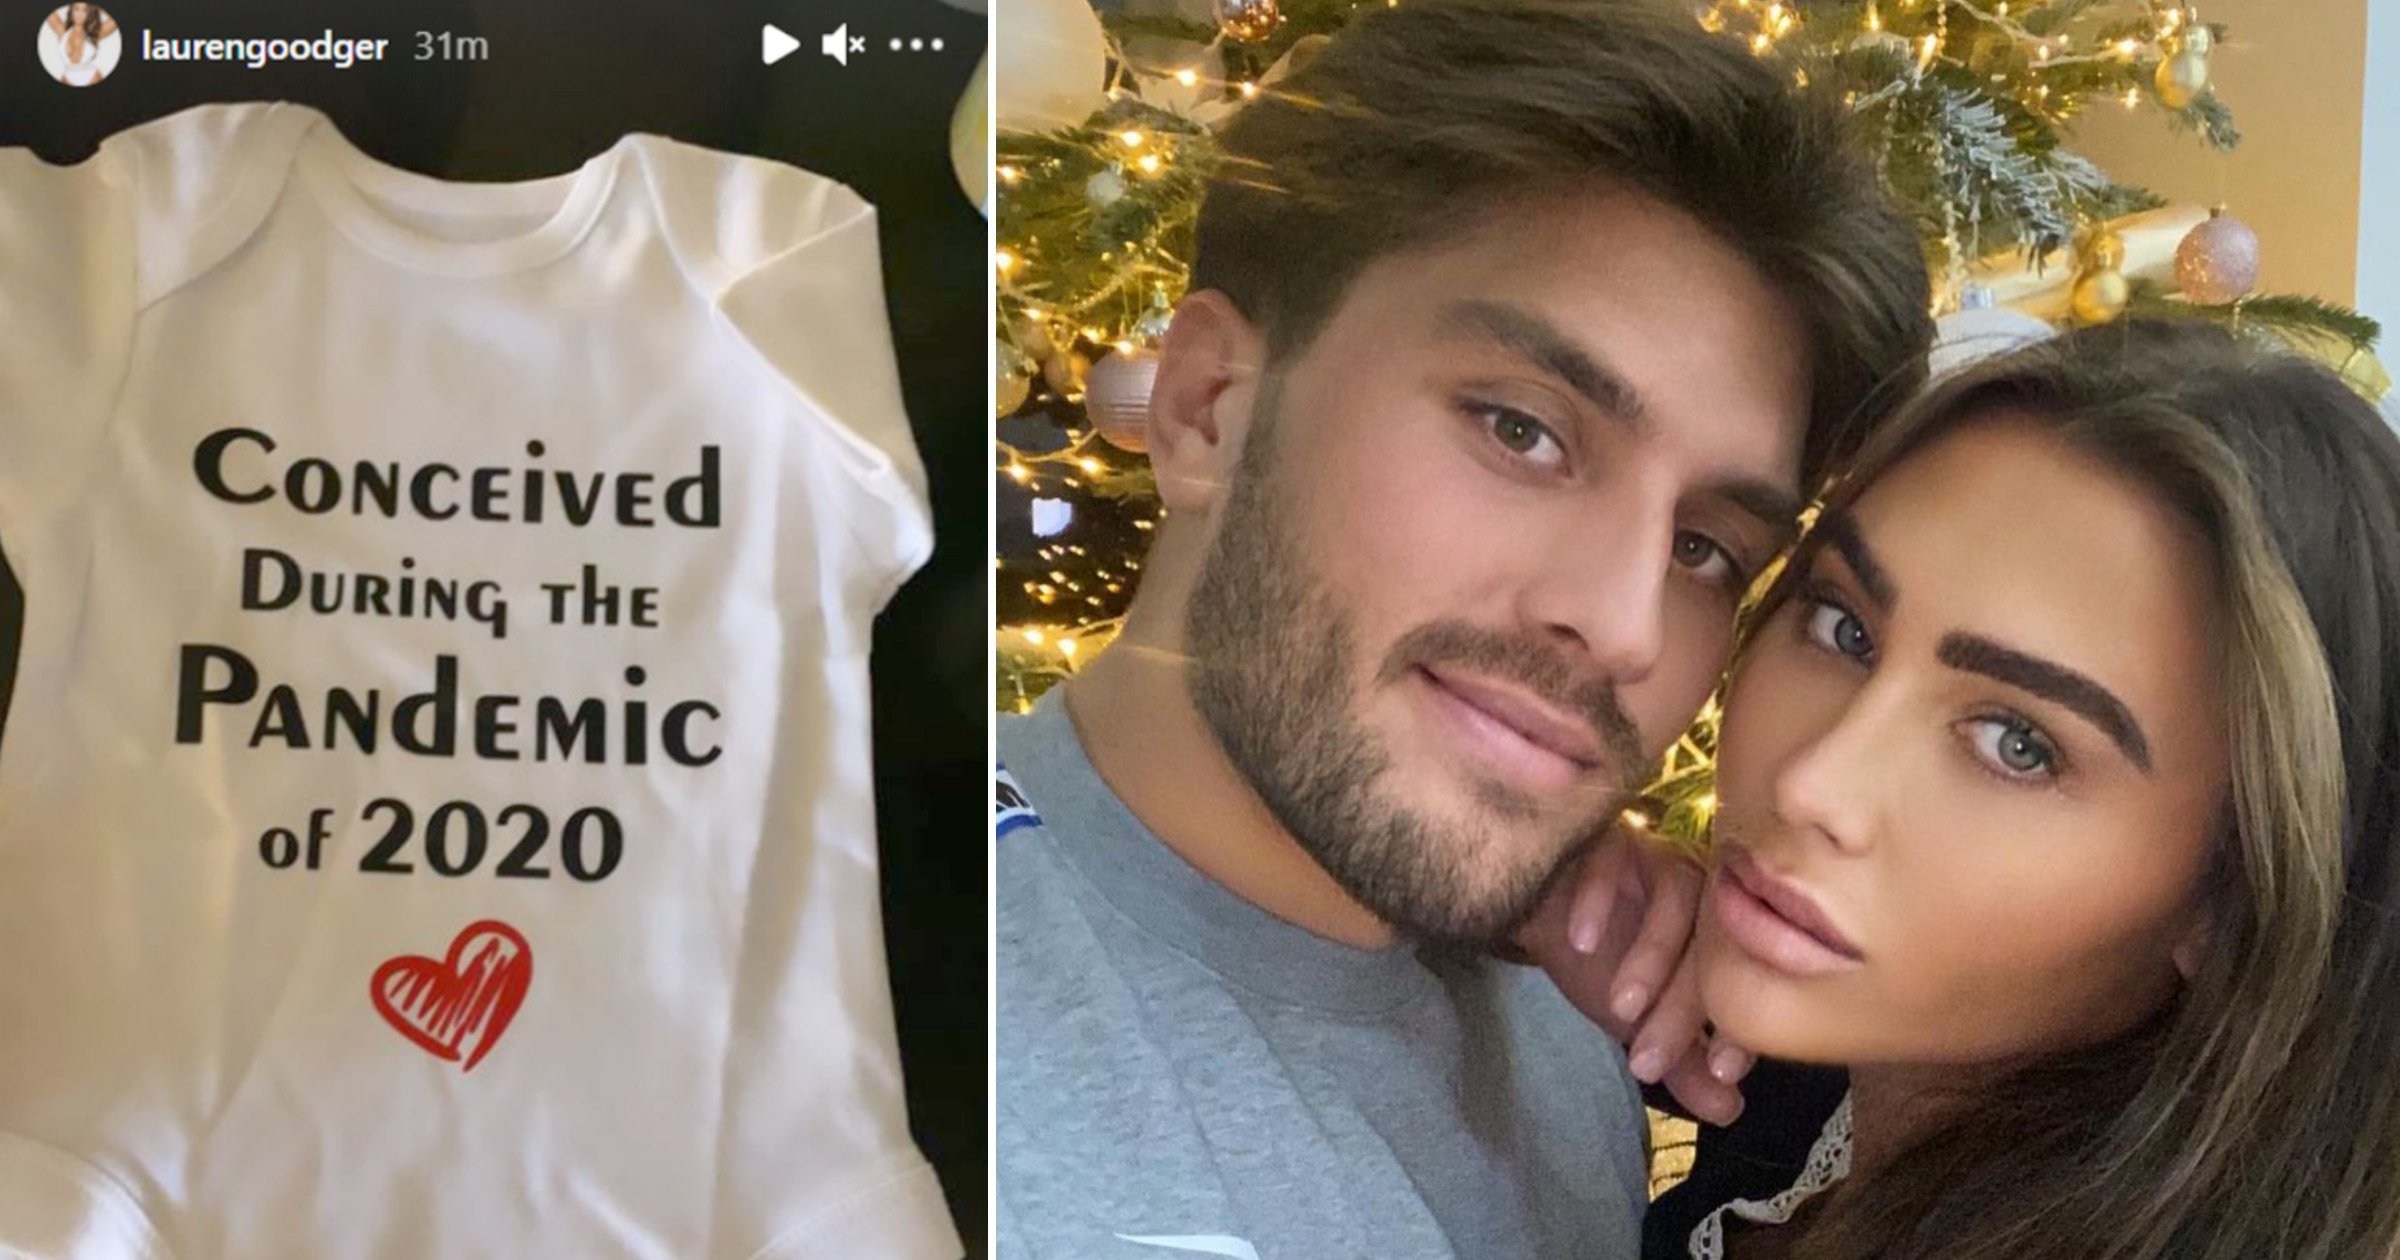 Lauren Goodger shares babygrow from Charles Drury’s mum and it’s quite something: ‘Conceived during the pandemic’